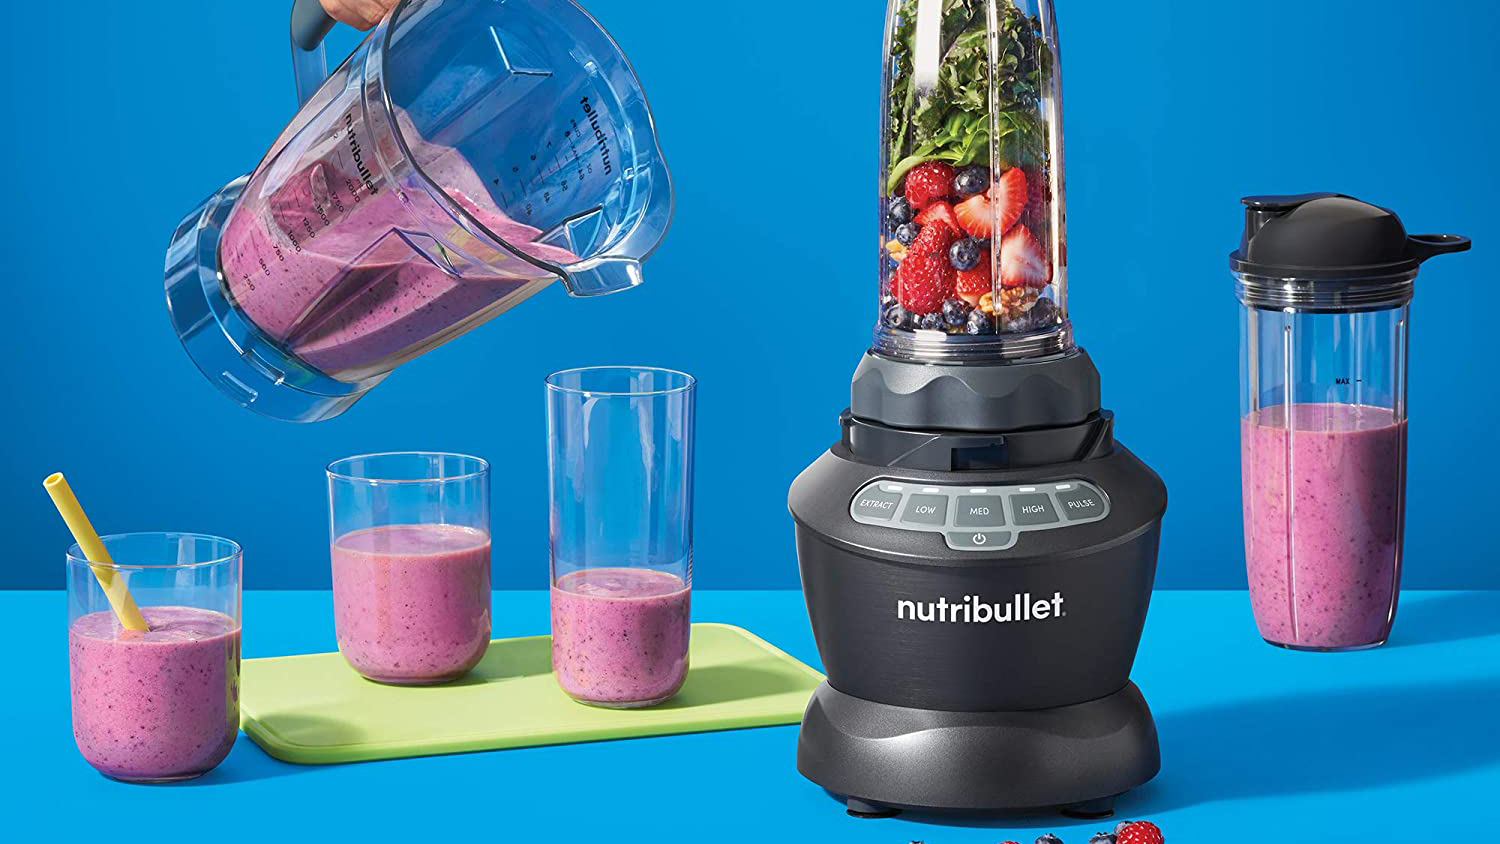 The Best Blenders for Smoothies, According to Allrecipes